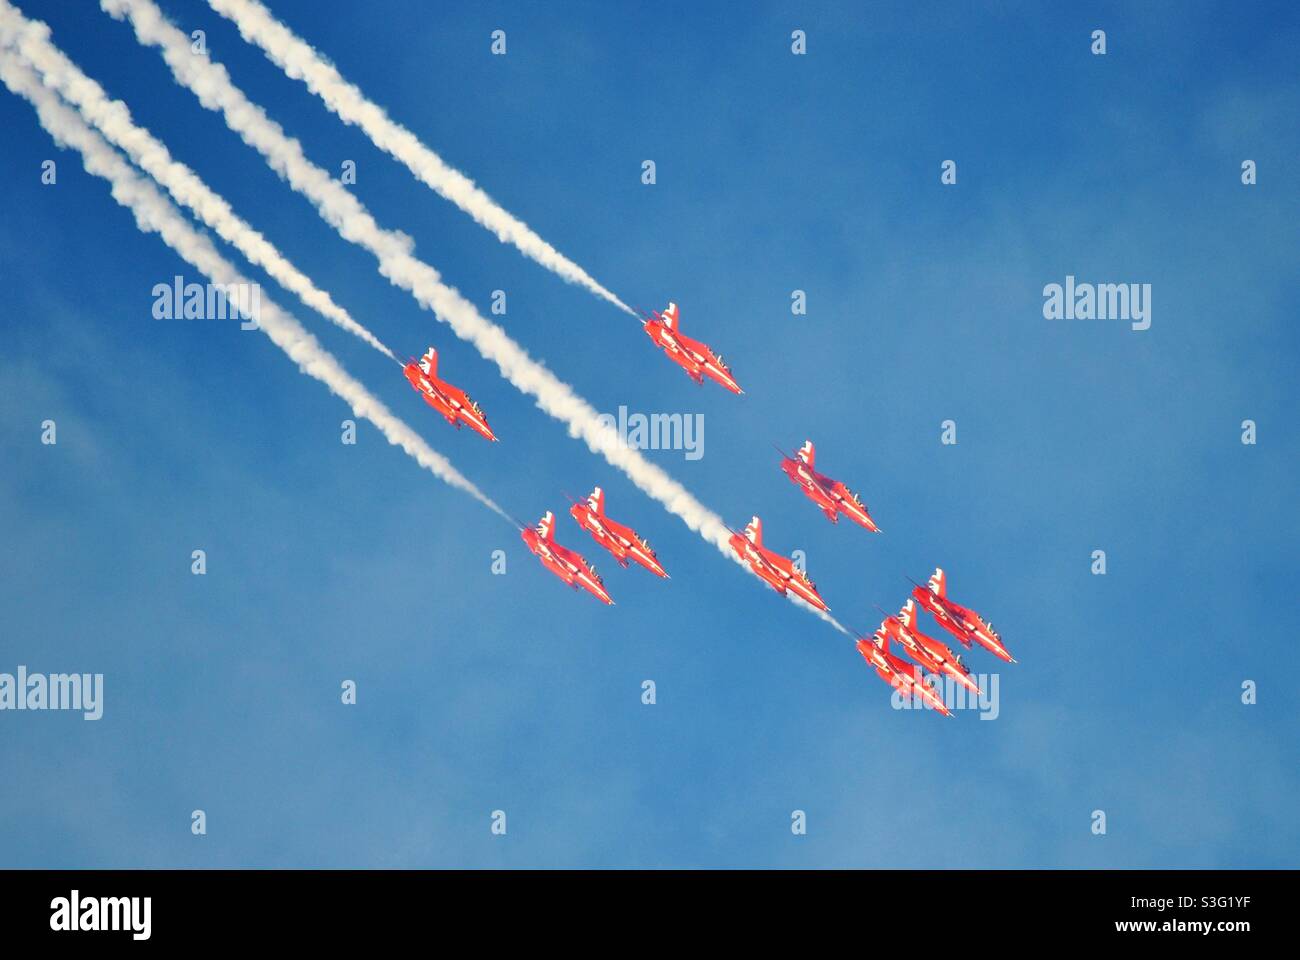 G7 Summit Cornwall: The Red Arrows perform over Carbis Bay / St Ives. Stock Photo